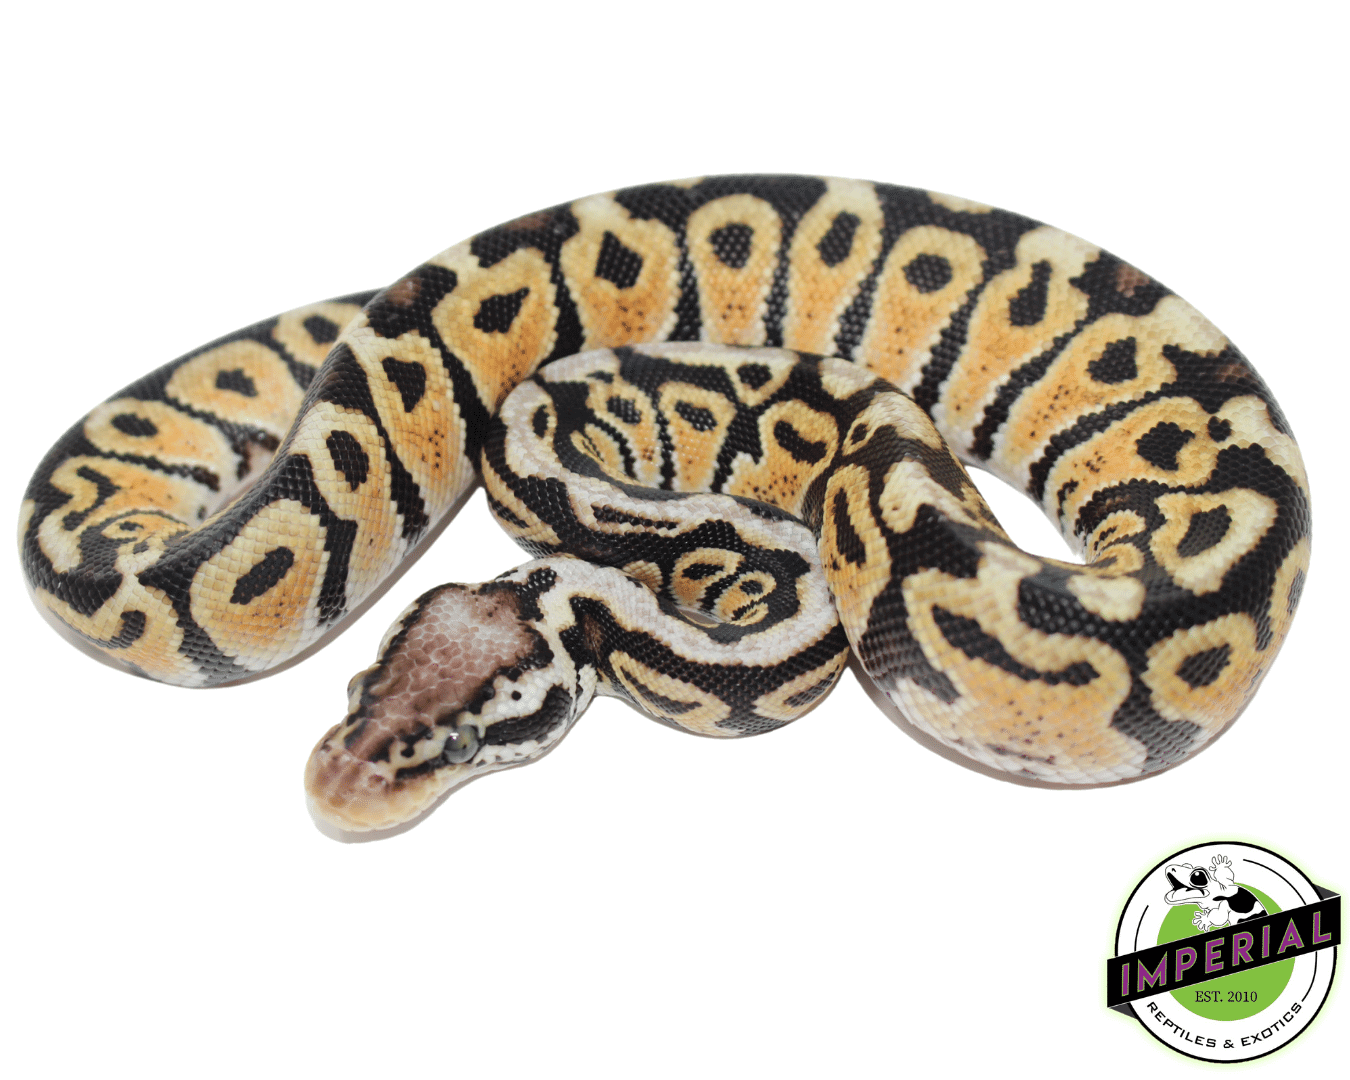 pastel spotnose  ball python for sale, buy reptiles online